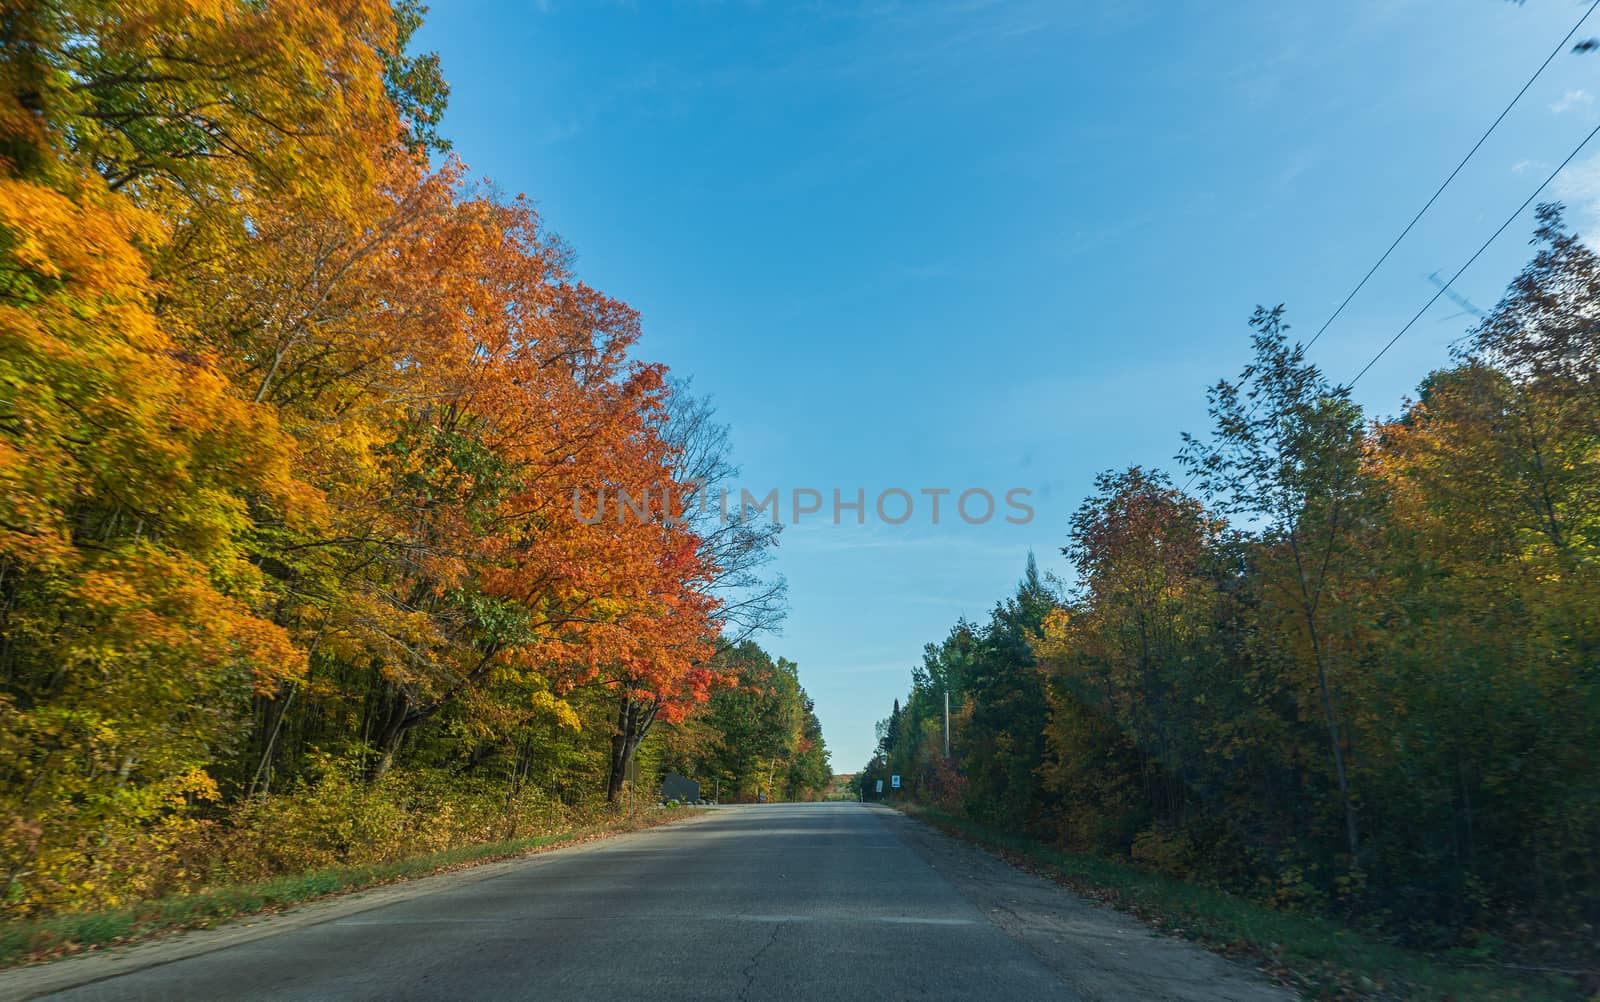 Autumn road to large lakes, maple leaves on the sidelines have already begun to turn yellow